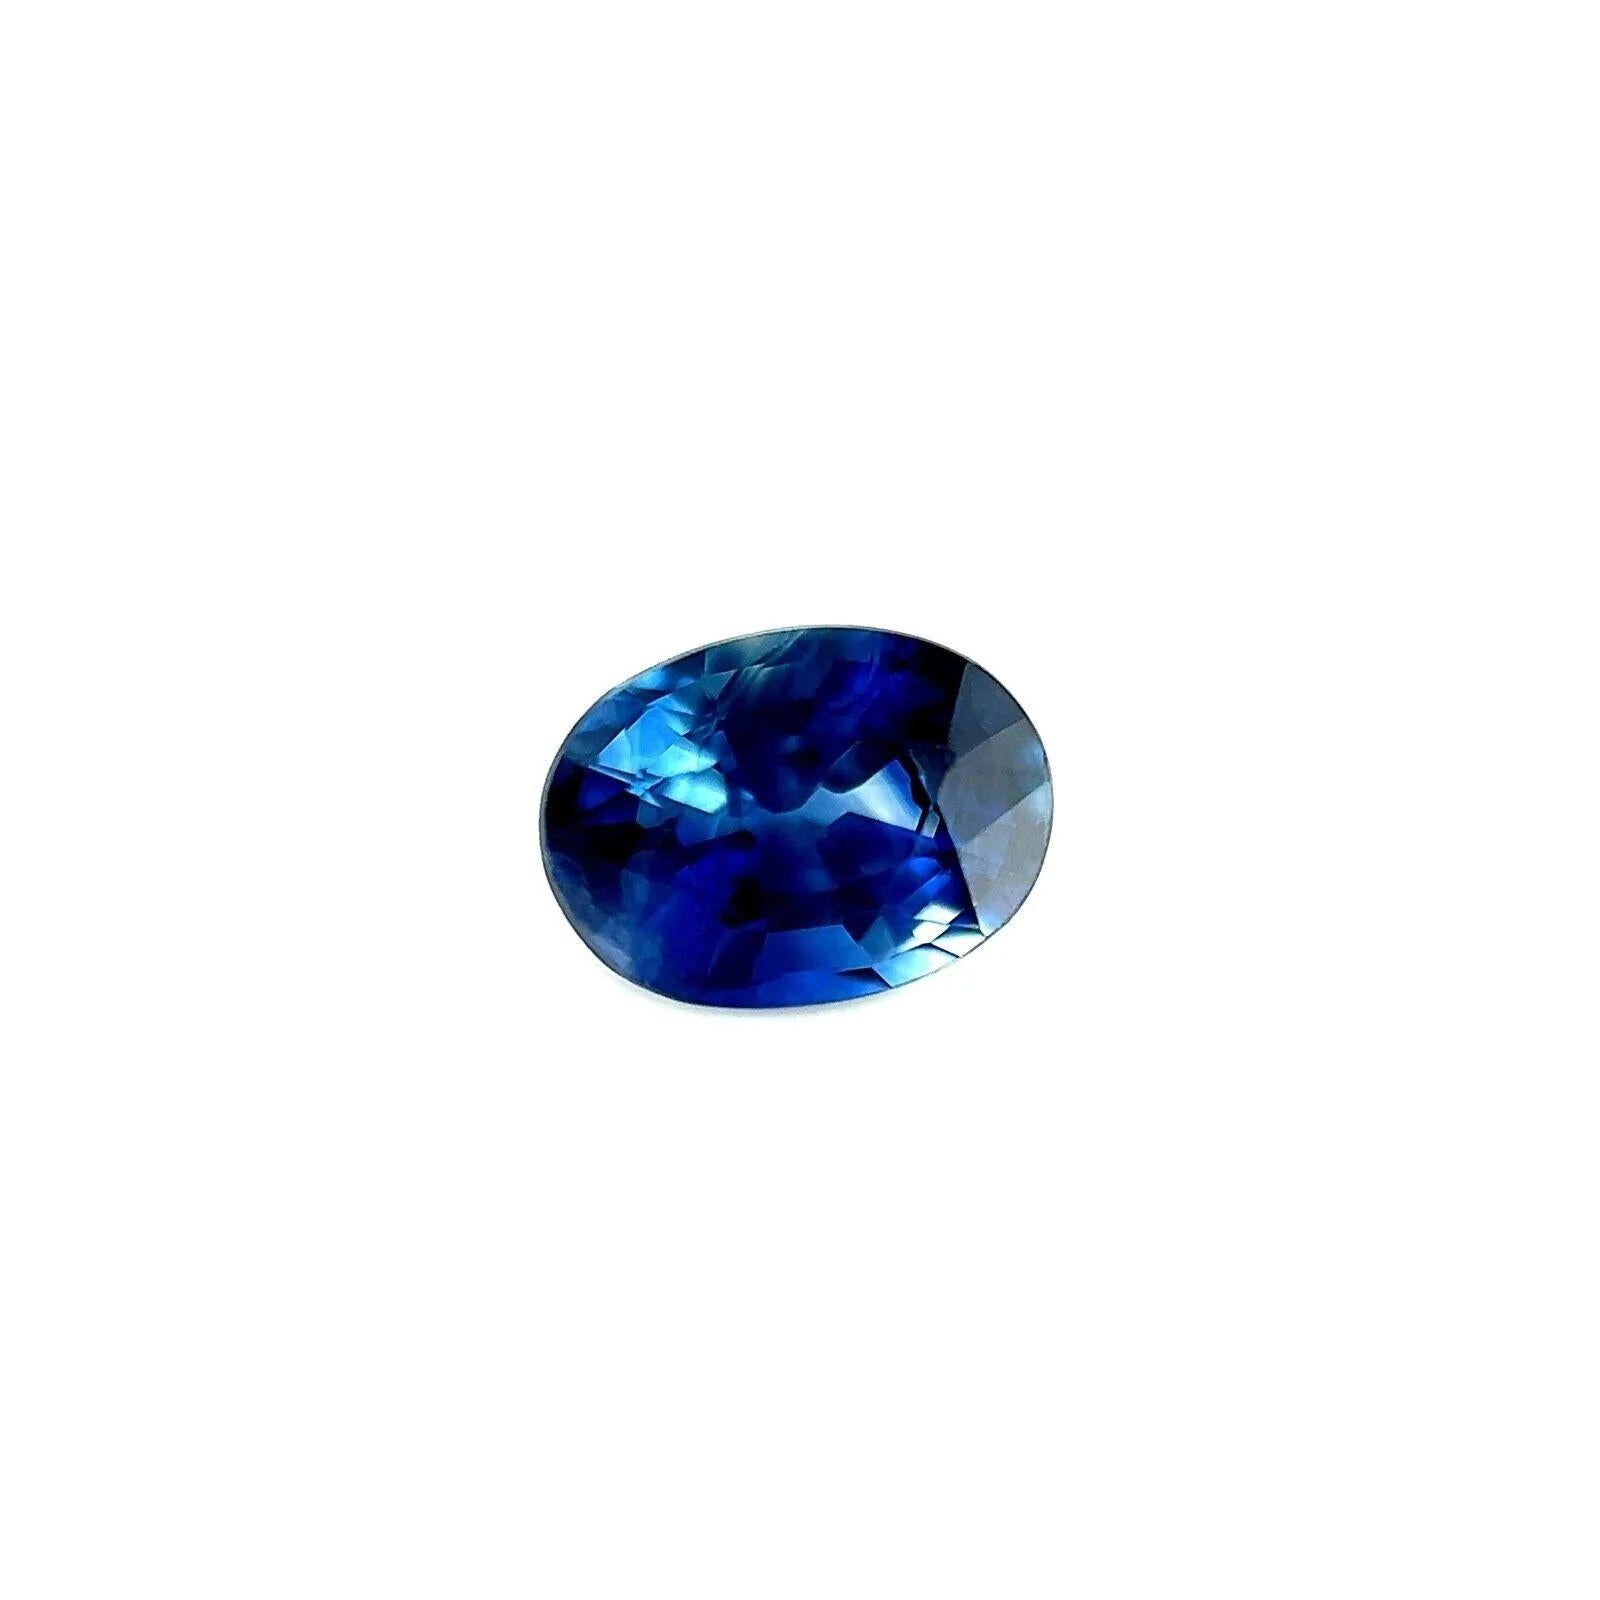 Fine 1.05ct Vivid Blue Oval Cut Sapphire Rare Thai Gemstone 6.6x4.8mm VVS

Fine Vivid Blue Oval Cut Sapphire Gemstone.
1.05 Carat with a beautiful and unique vivid blue colour and excellent clarity, a very clean stone, VS.
Also has an excellent cut